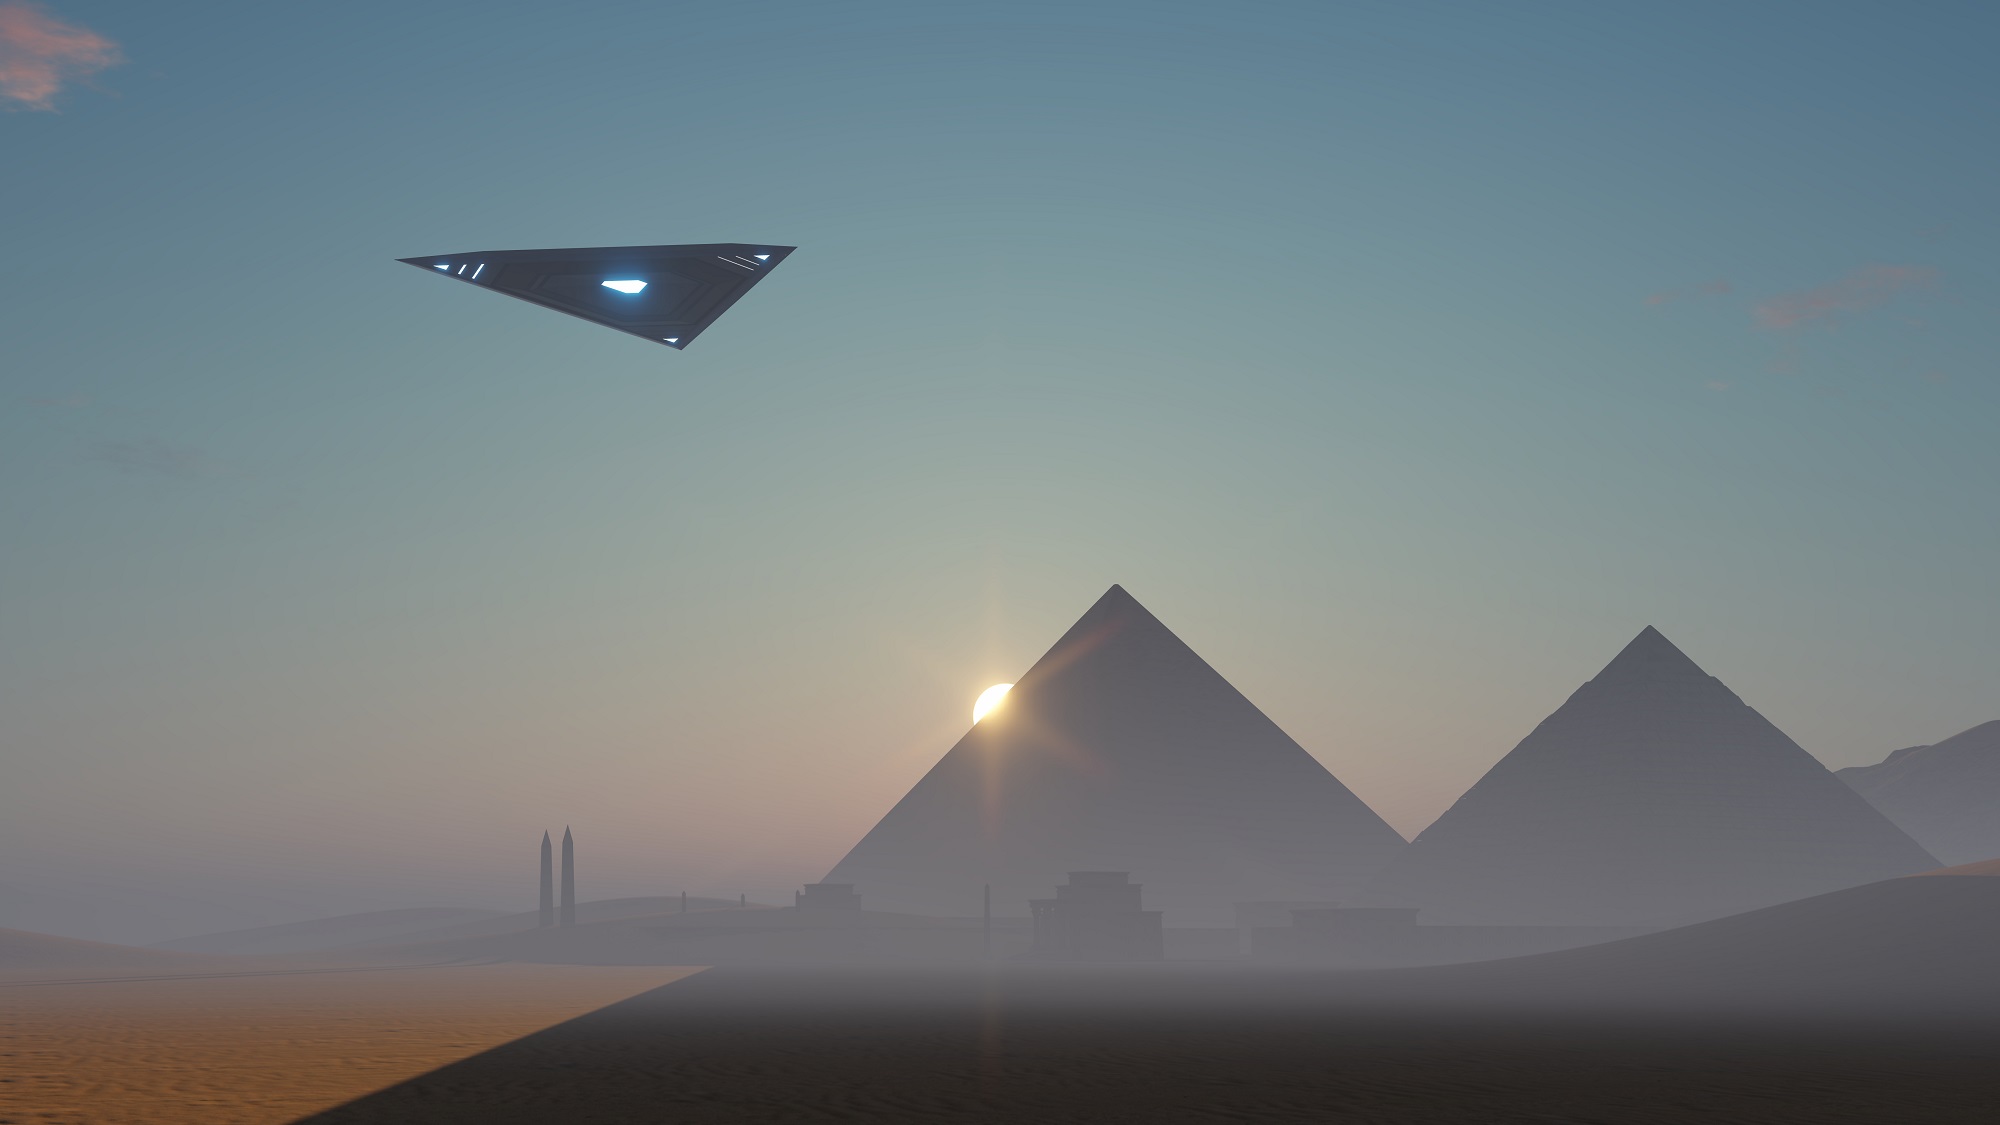 An artists rendering of a UFO above the pyramids. Shutterstock.